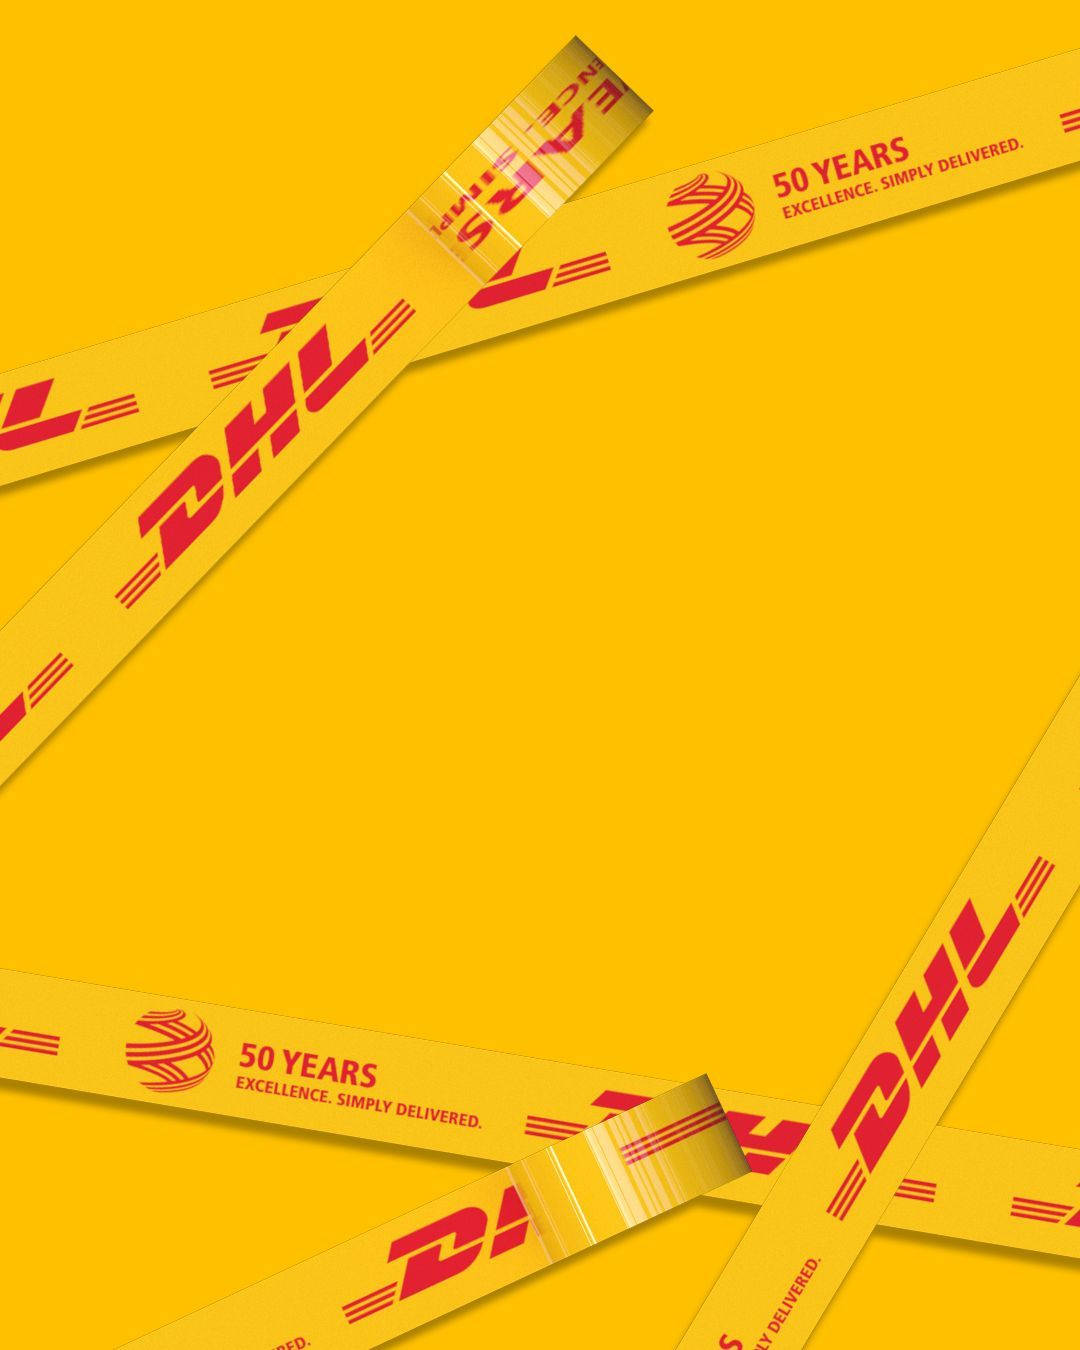 Dhl Duct Tapes Background